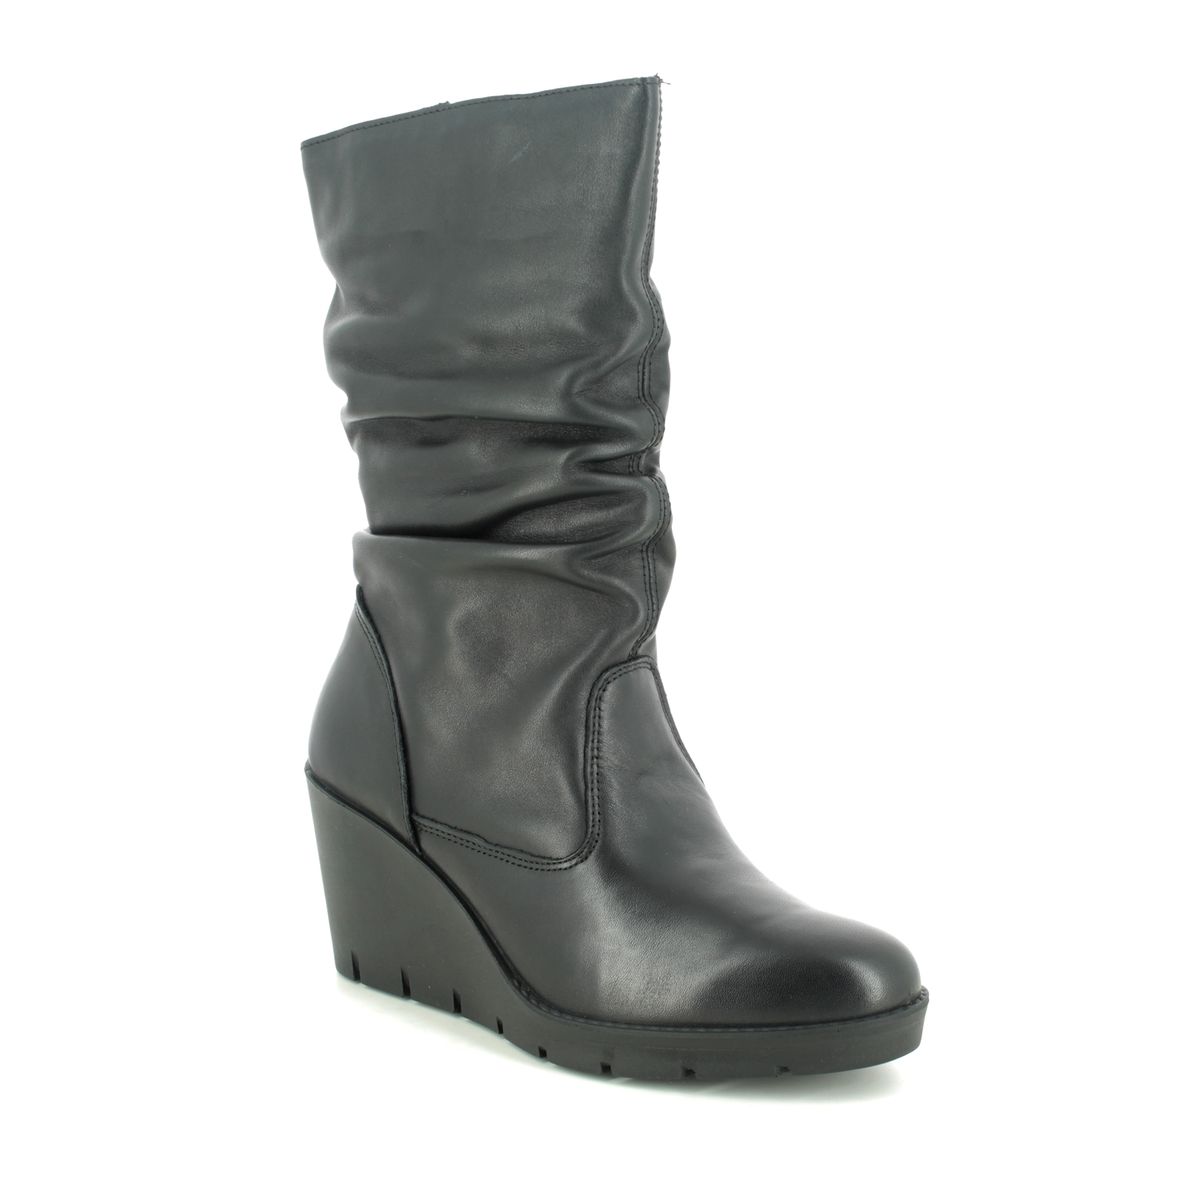 IMAC Vale Slouch 6540-1400011 Black leather Mid Calf Boots